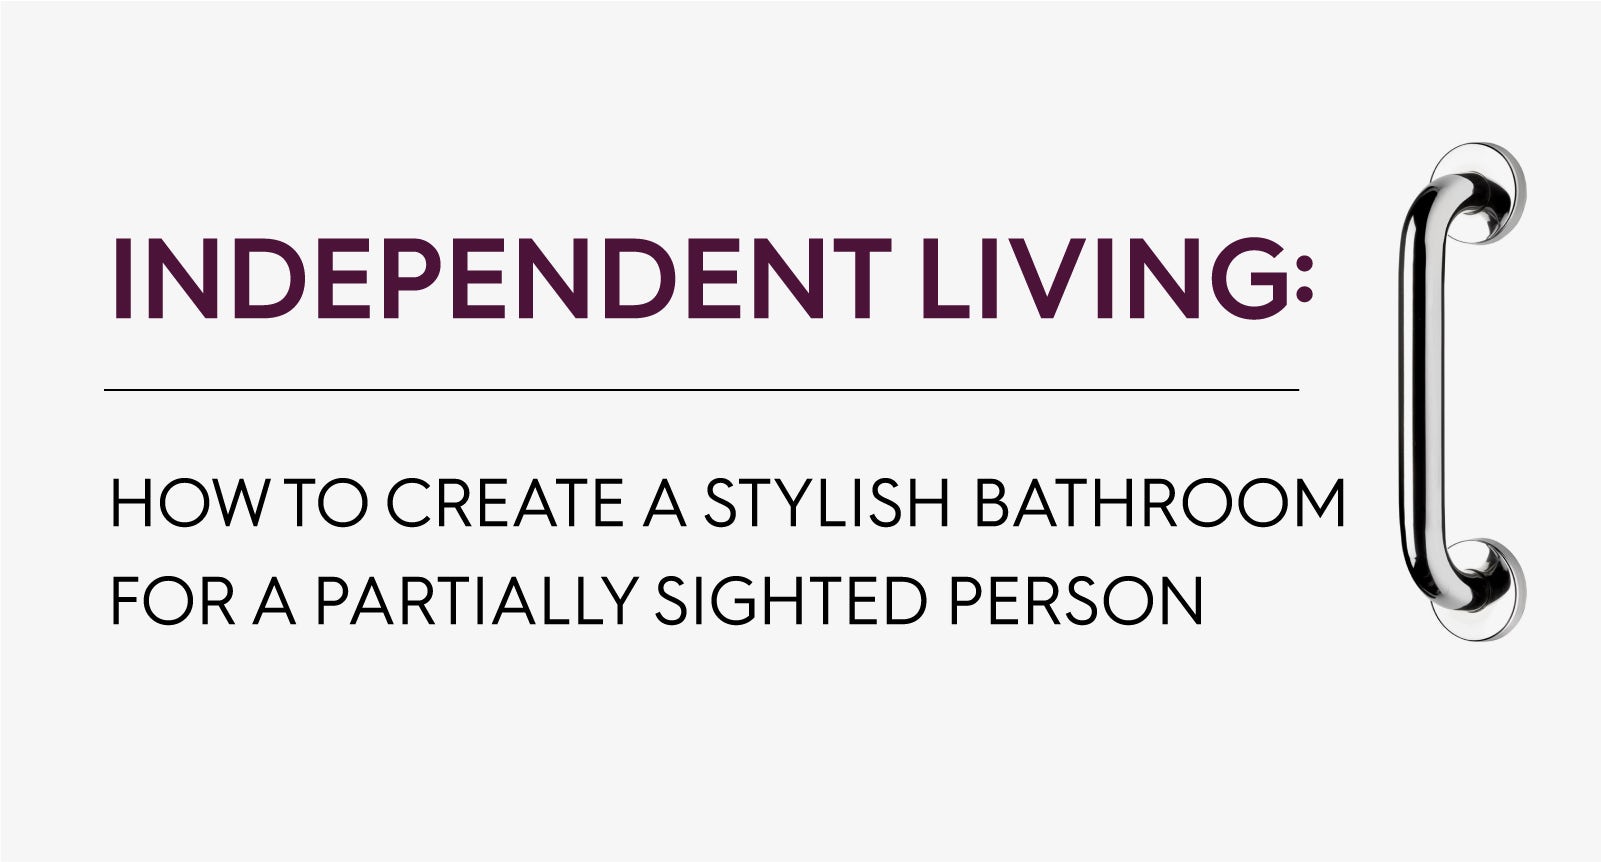 Independent Living: How to create a stylish bathroom for a partially sighted person